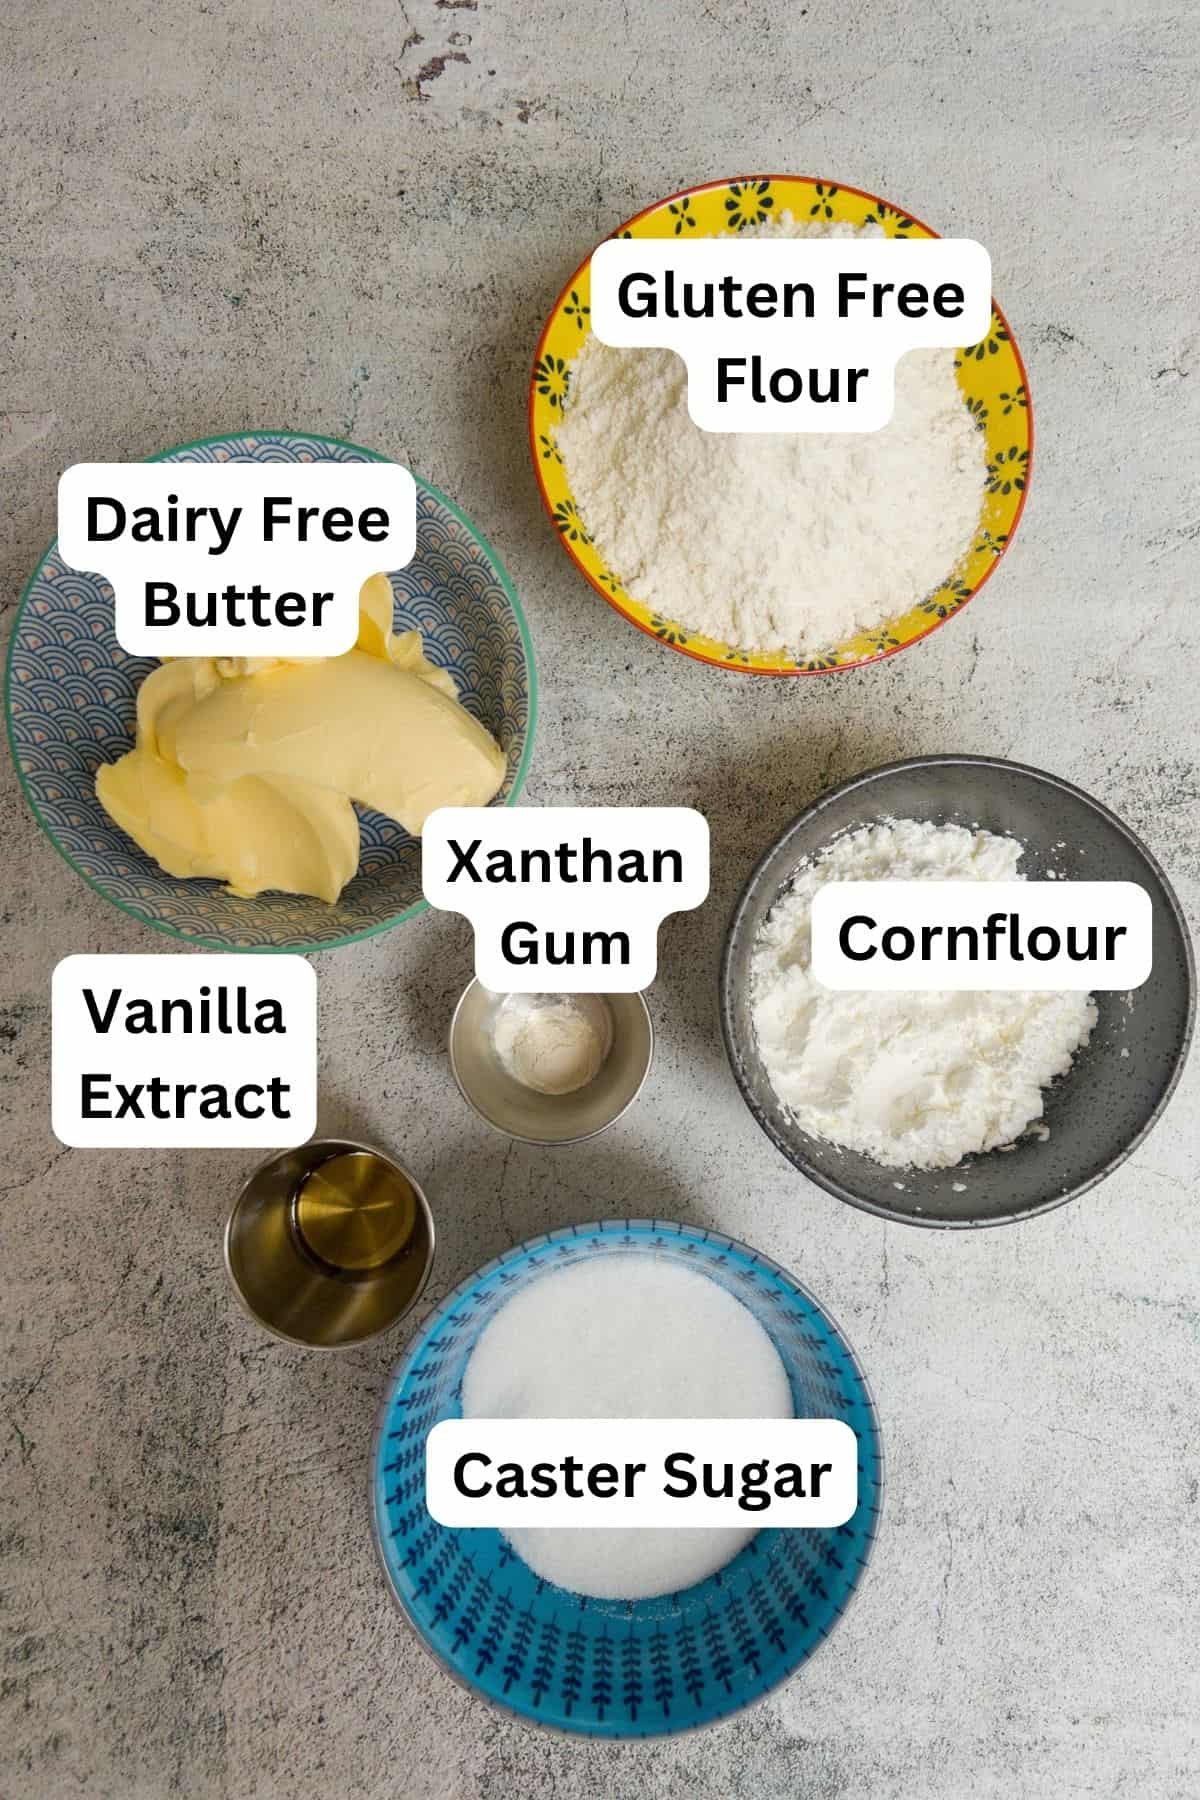 ingredients laid out to make gluten free shortbread cookies